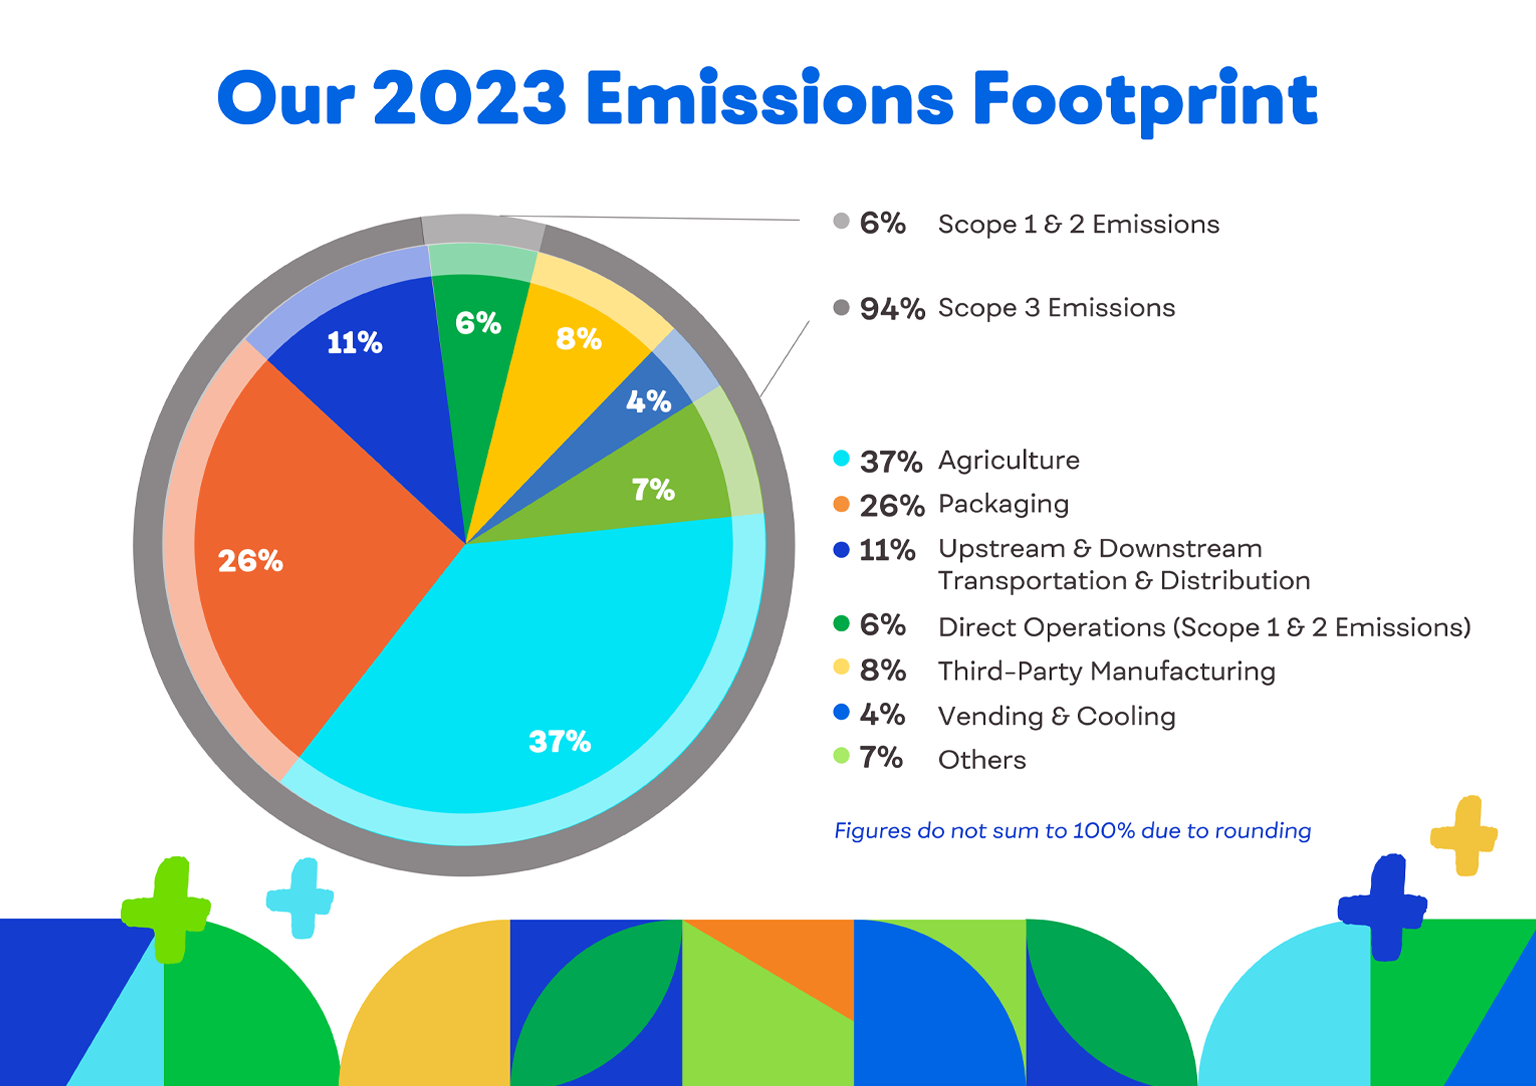 Our 2023 Emissions Footprint